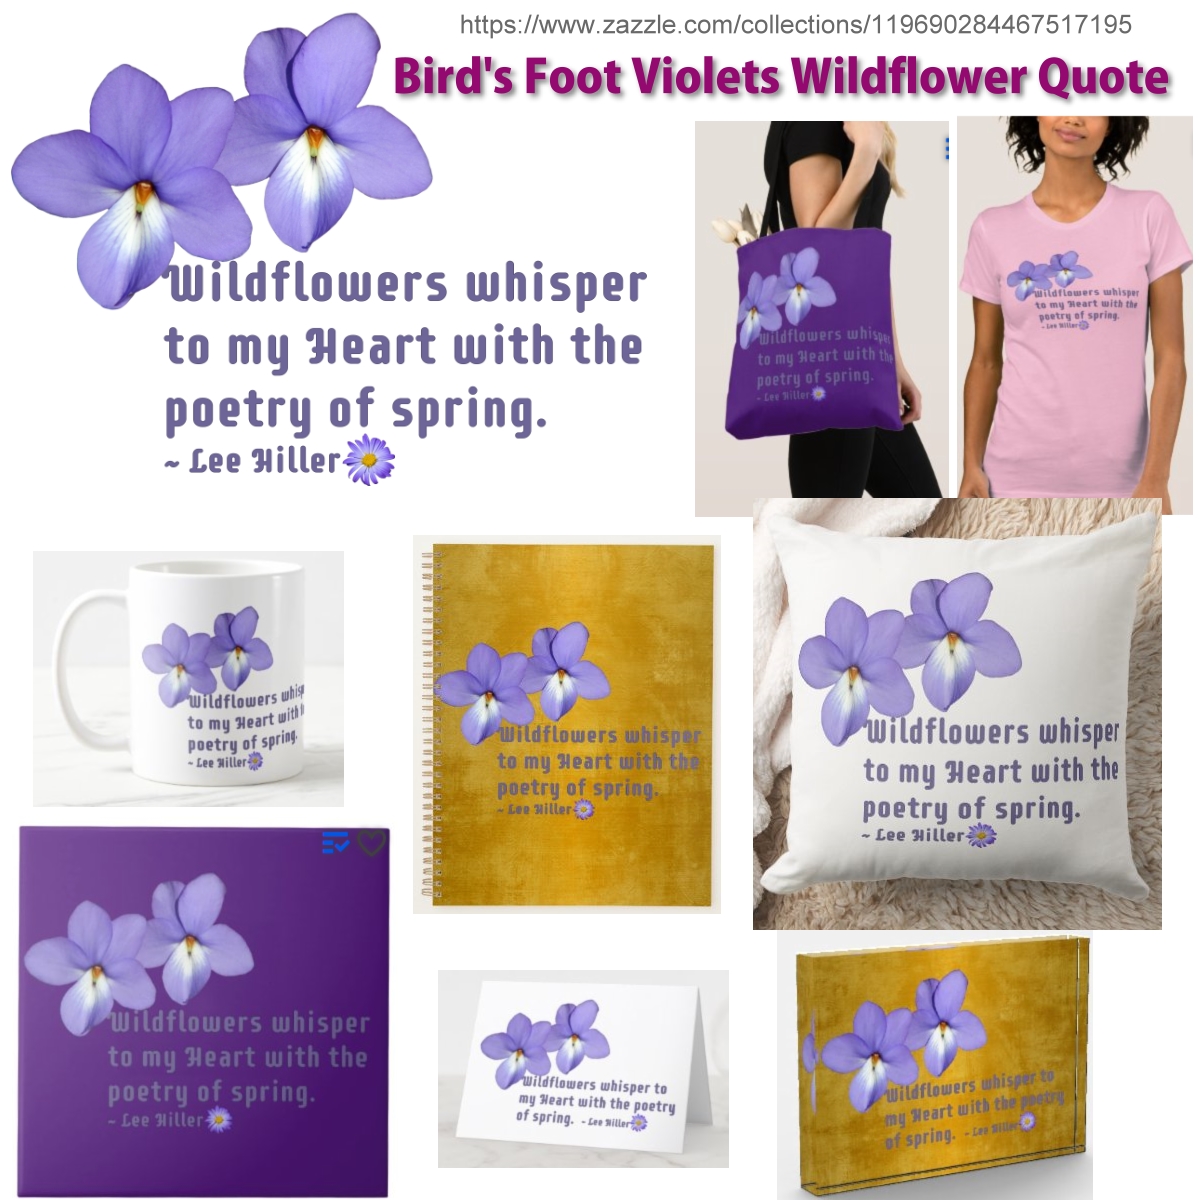 🌱🪻💜🪻🌱 Bird's Foot #Violets #wildflowers zazzle.com/collections/11… #quoteoftheday #photography #PhotographyIsArt #poetry #MothersDay #quotes #gifts #giftideas #tshirts #totebag #mug #pillow #notebook #tile #greetingcards